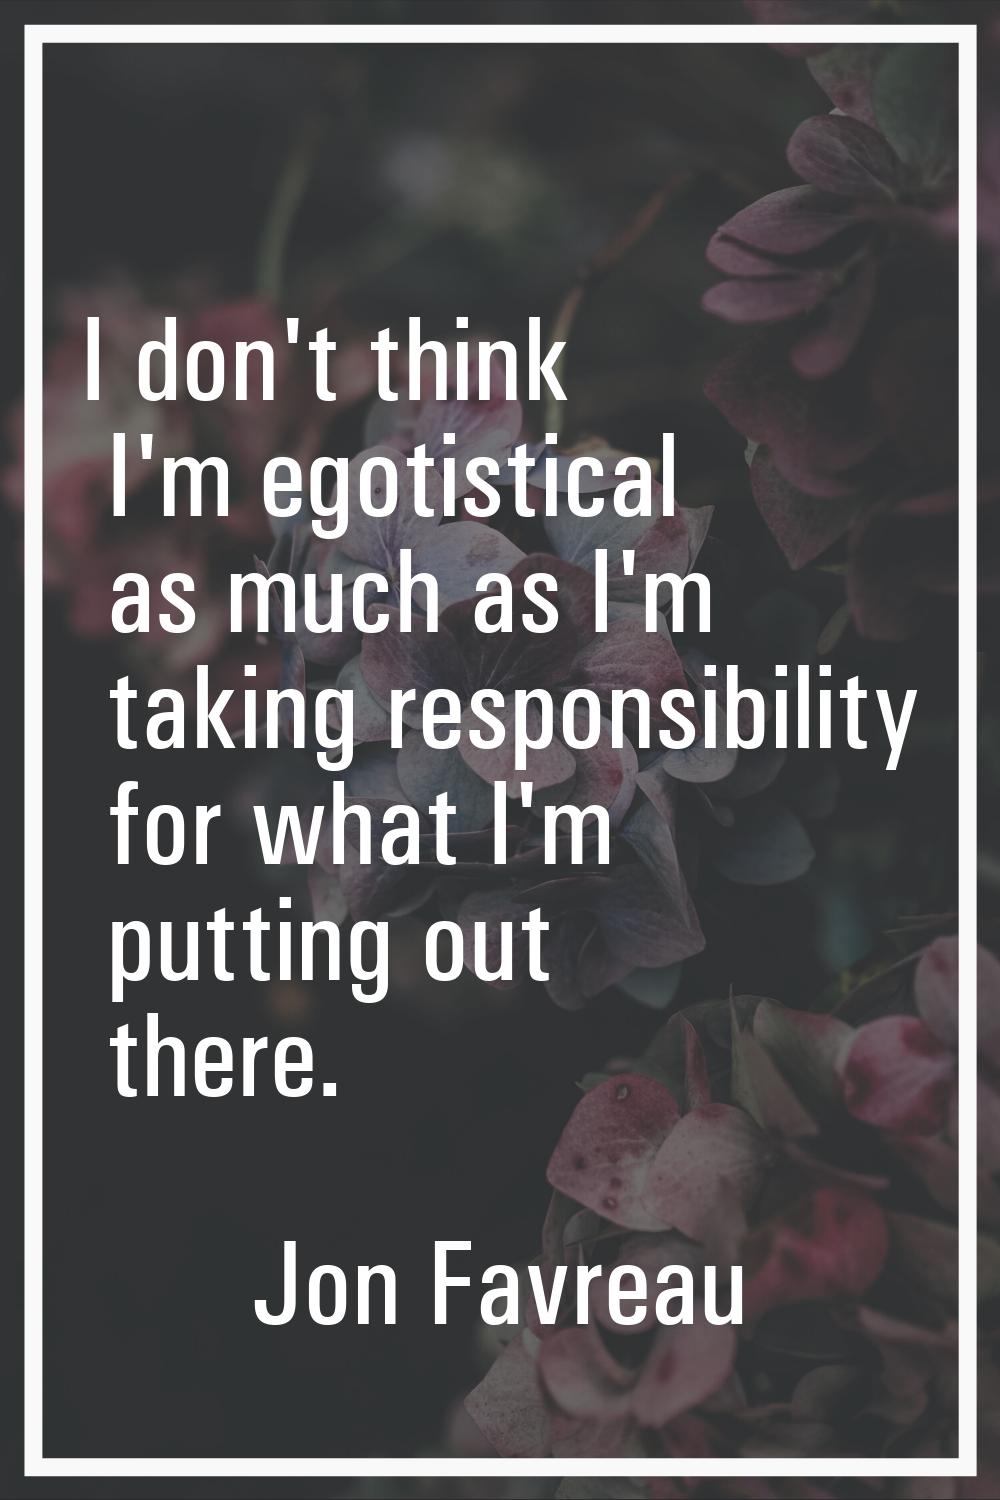 I don't think I'm egotistical as much as I'm taking responsibility for what I'm putting out there.